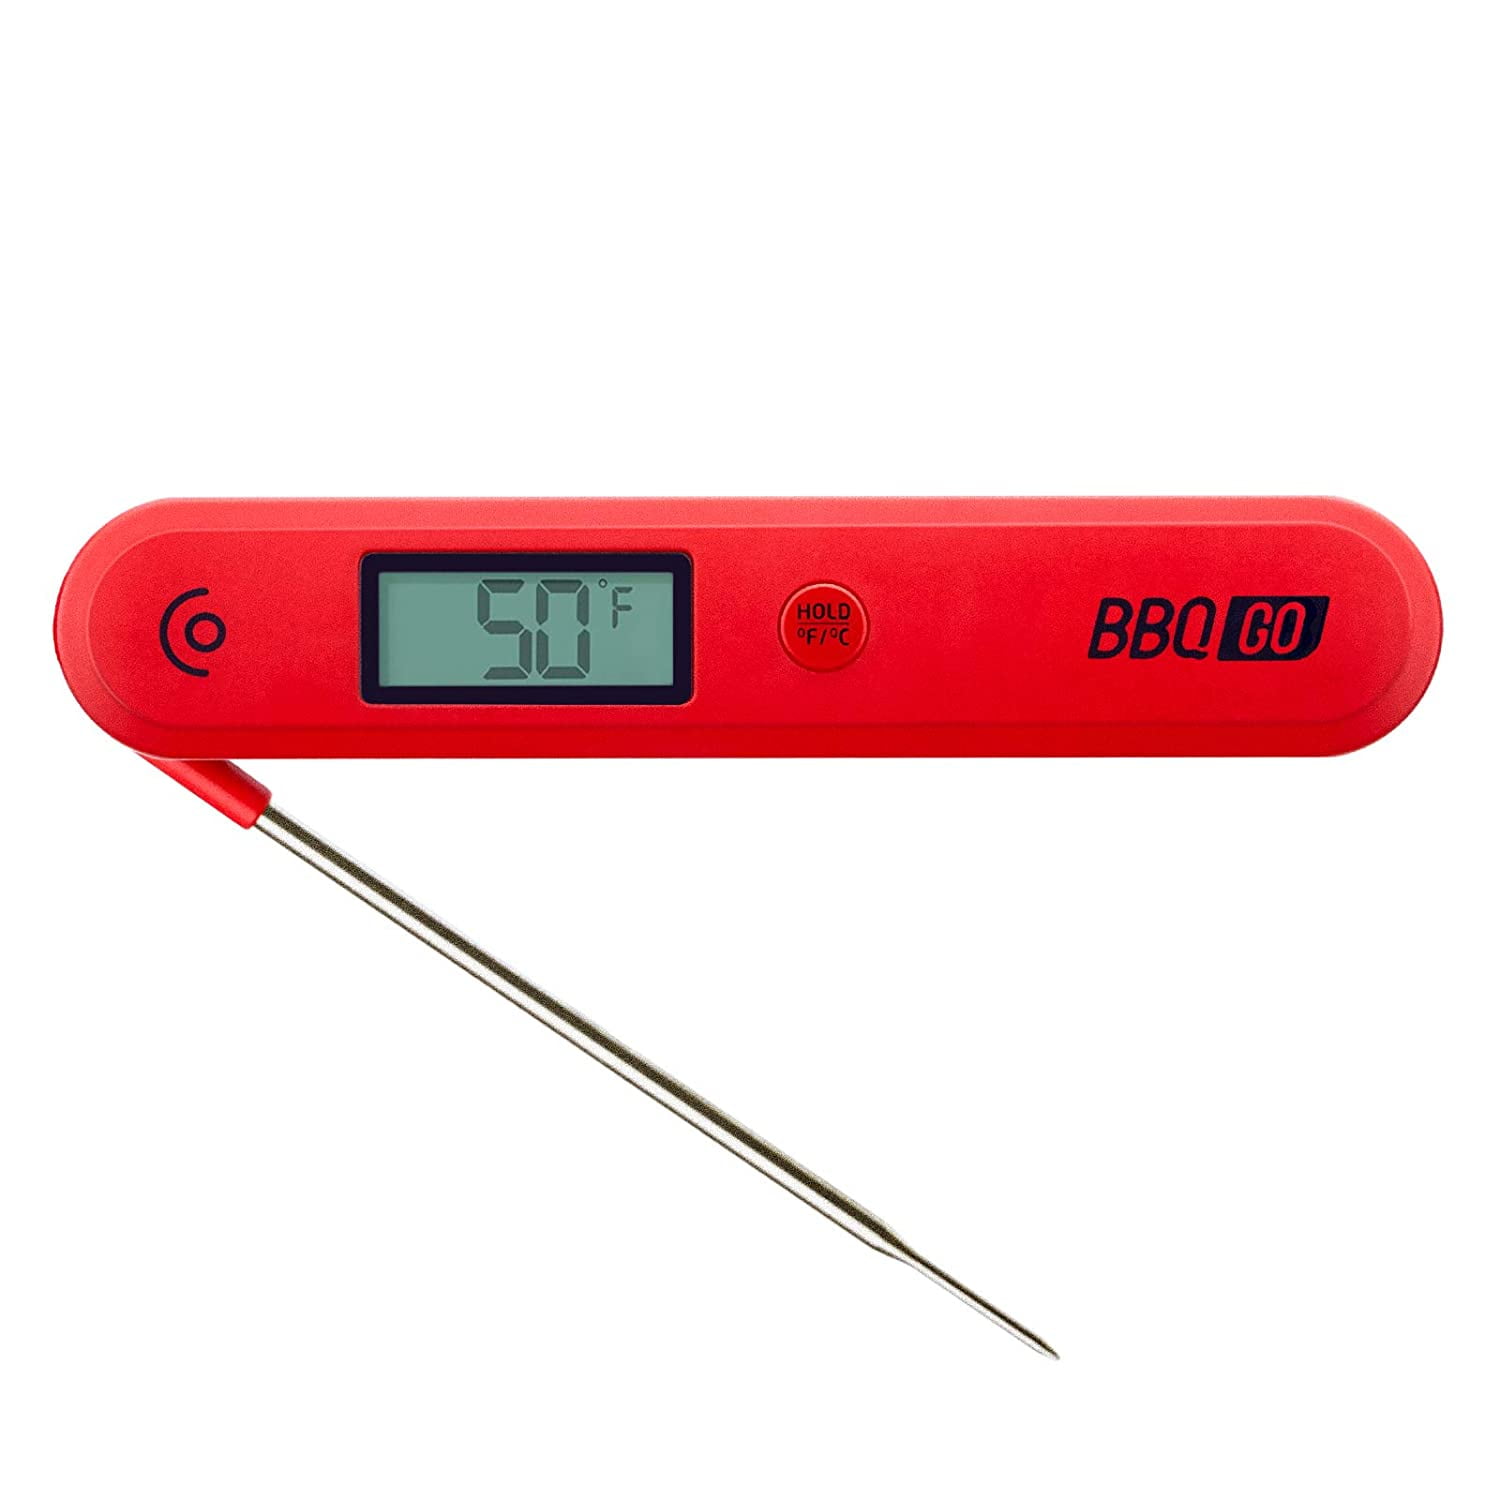 Limited Edition GRILLGIRL® Teal Digital Meat Thermometer